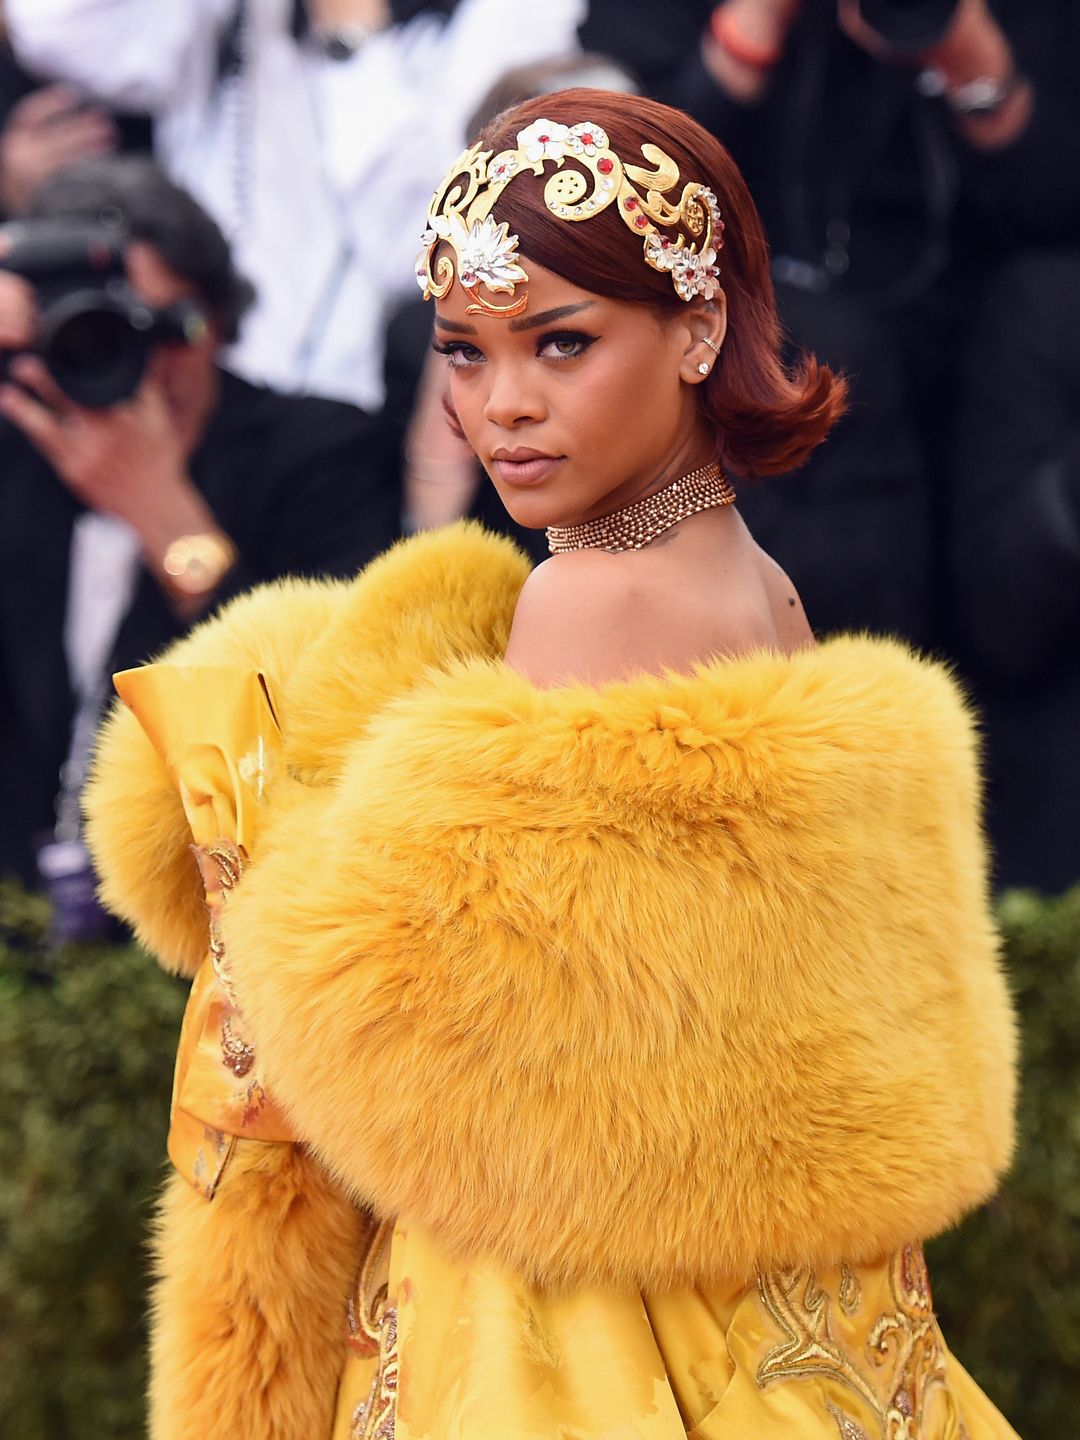 Rihanna attends the "China: Through The Looking Glass" Costume Institute Benefit Gala at the  Metropolitan Museum of Art on May 4, 2015 in New York City.